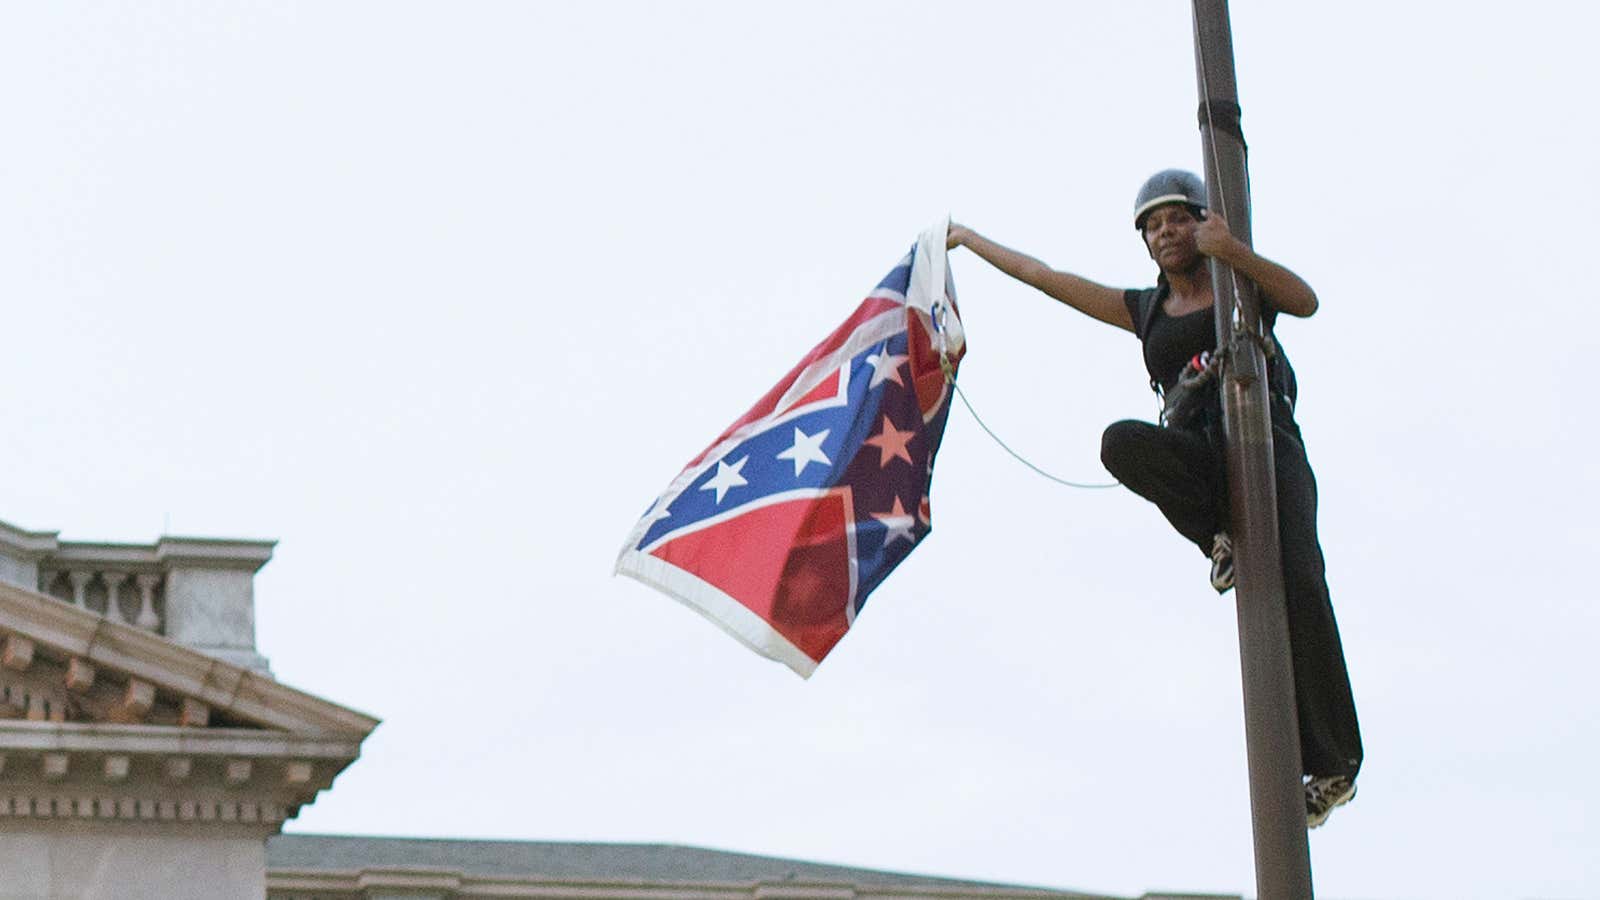 Brittany “Bree” Newsome removes the Confederate flag from a pole at the Statehouse in Columbia, South Carolina, June 27, 2015.